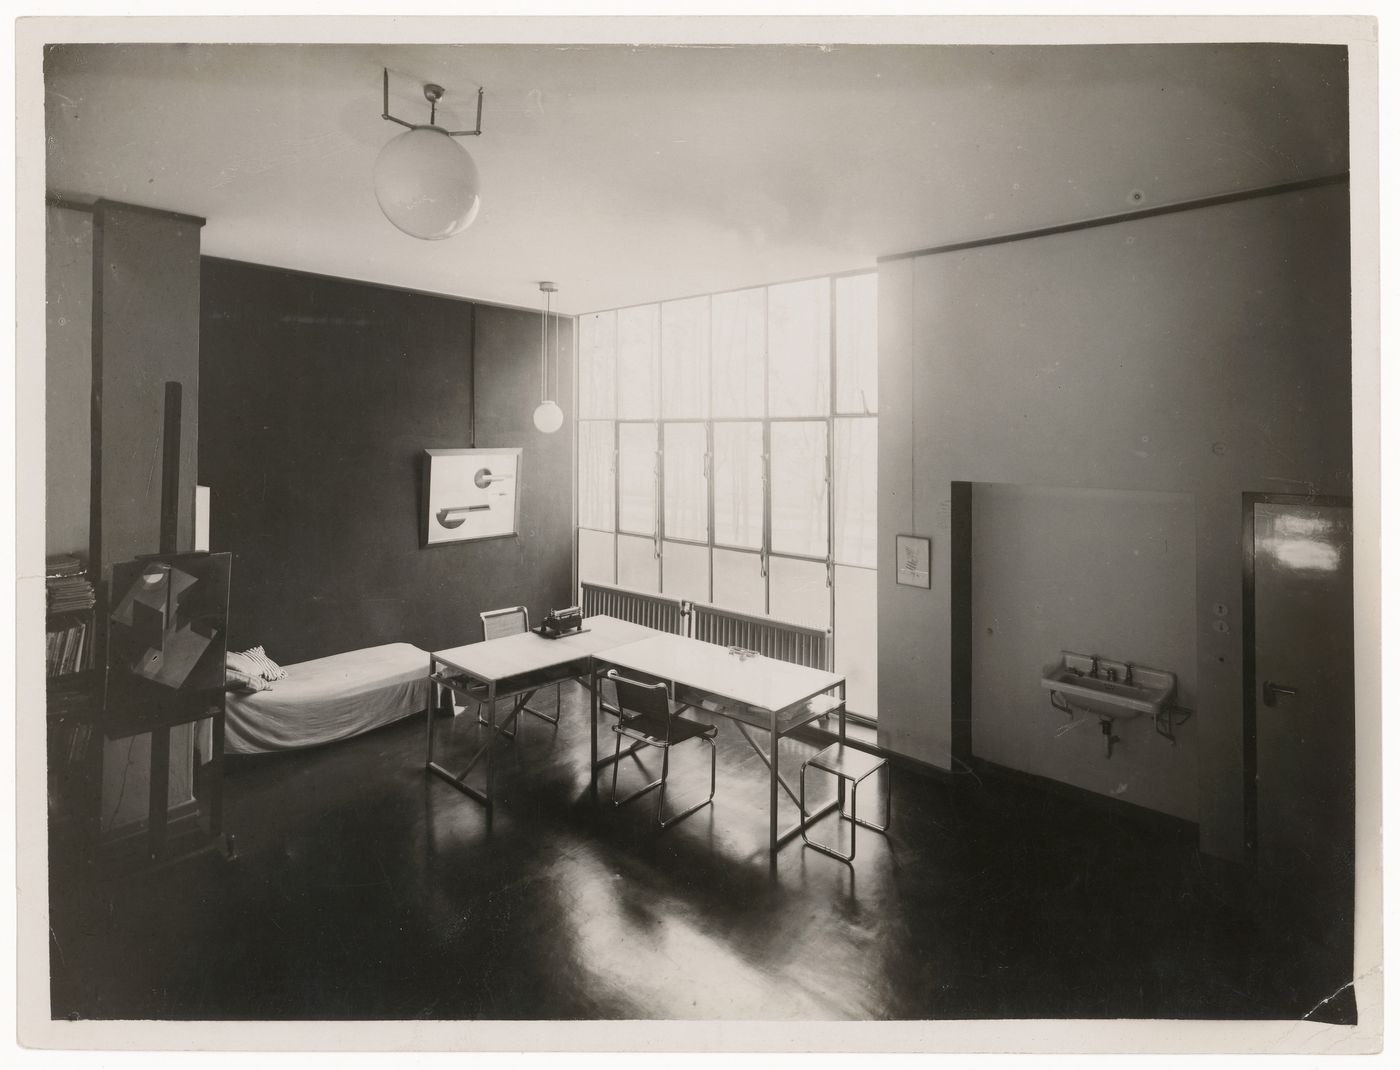 Interior view of the studio of Moholy-Nagy's house showing furniture designed by Marcel Breuer, Bauhaus Masters' Housing, Dessau, Germany